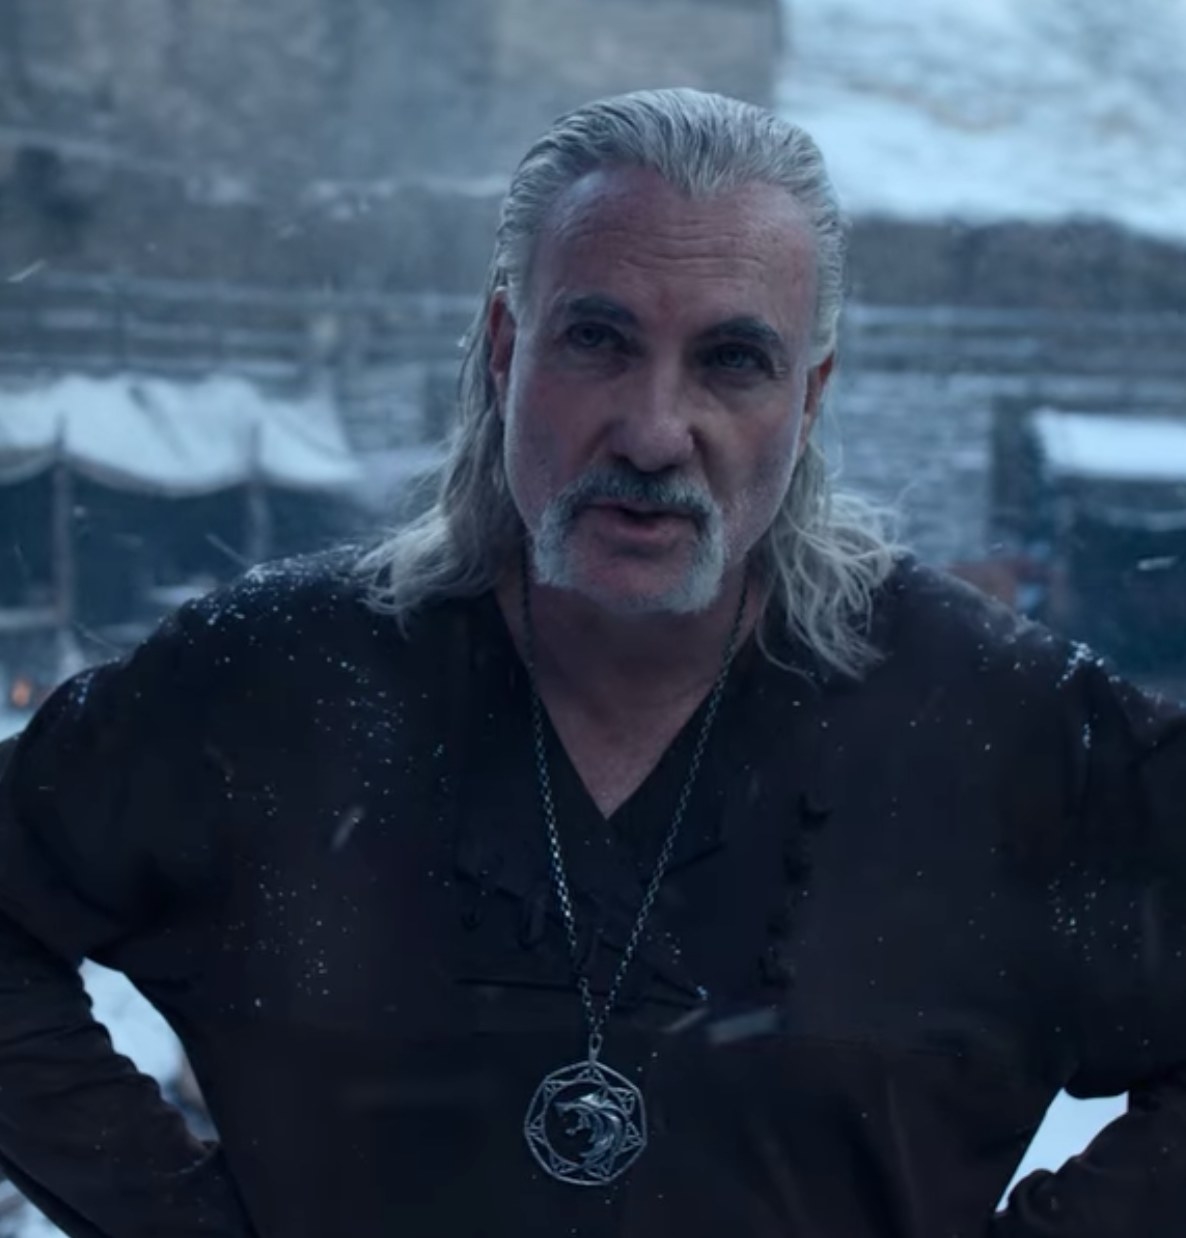 Kim Bodnia as Vesemir stands in the snow in &quot;The Witcher&quot;